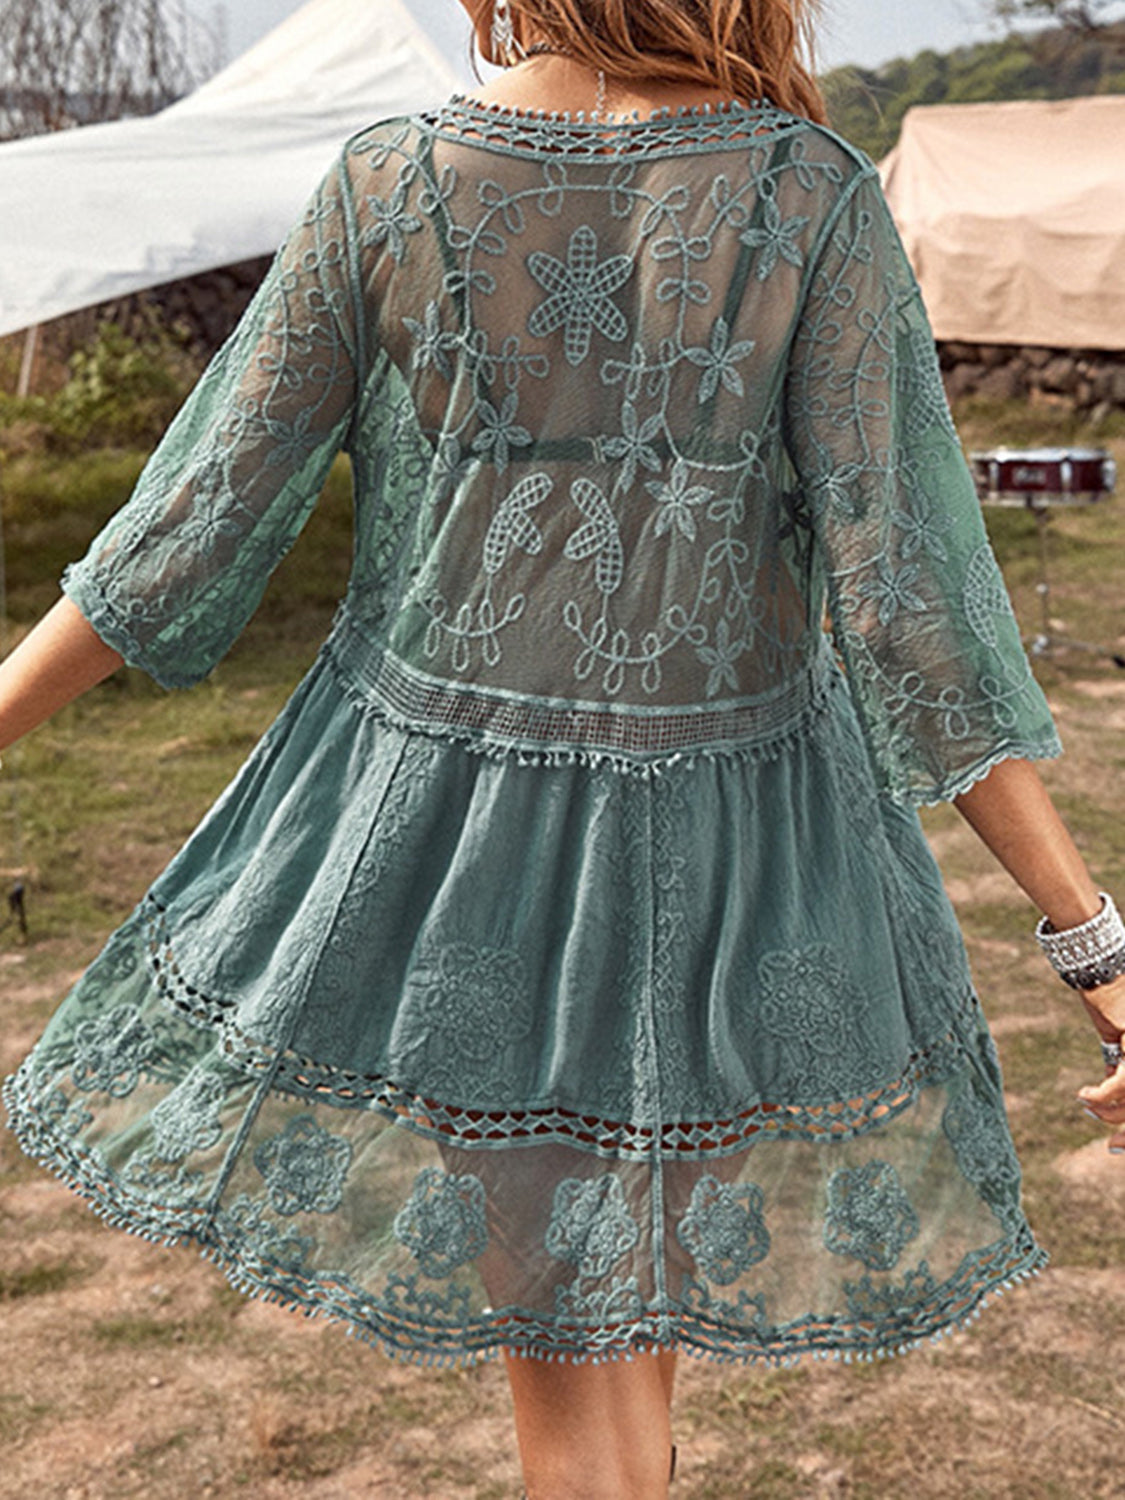 LACE DETAIL PLUNGE COVER-UP